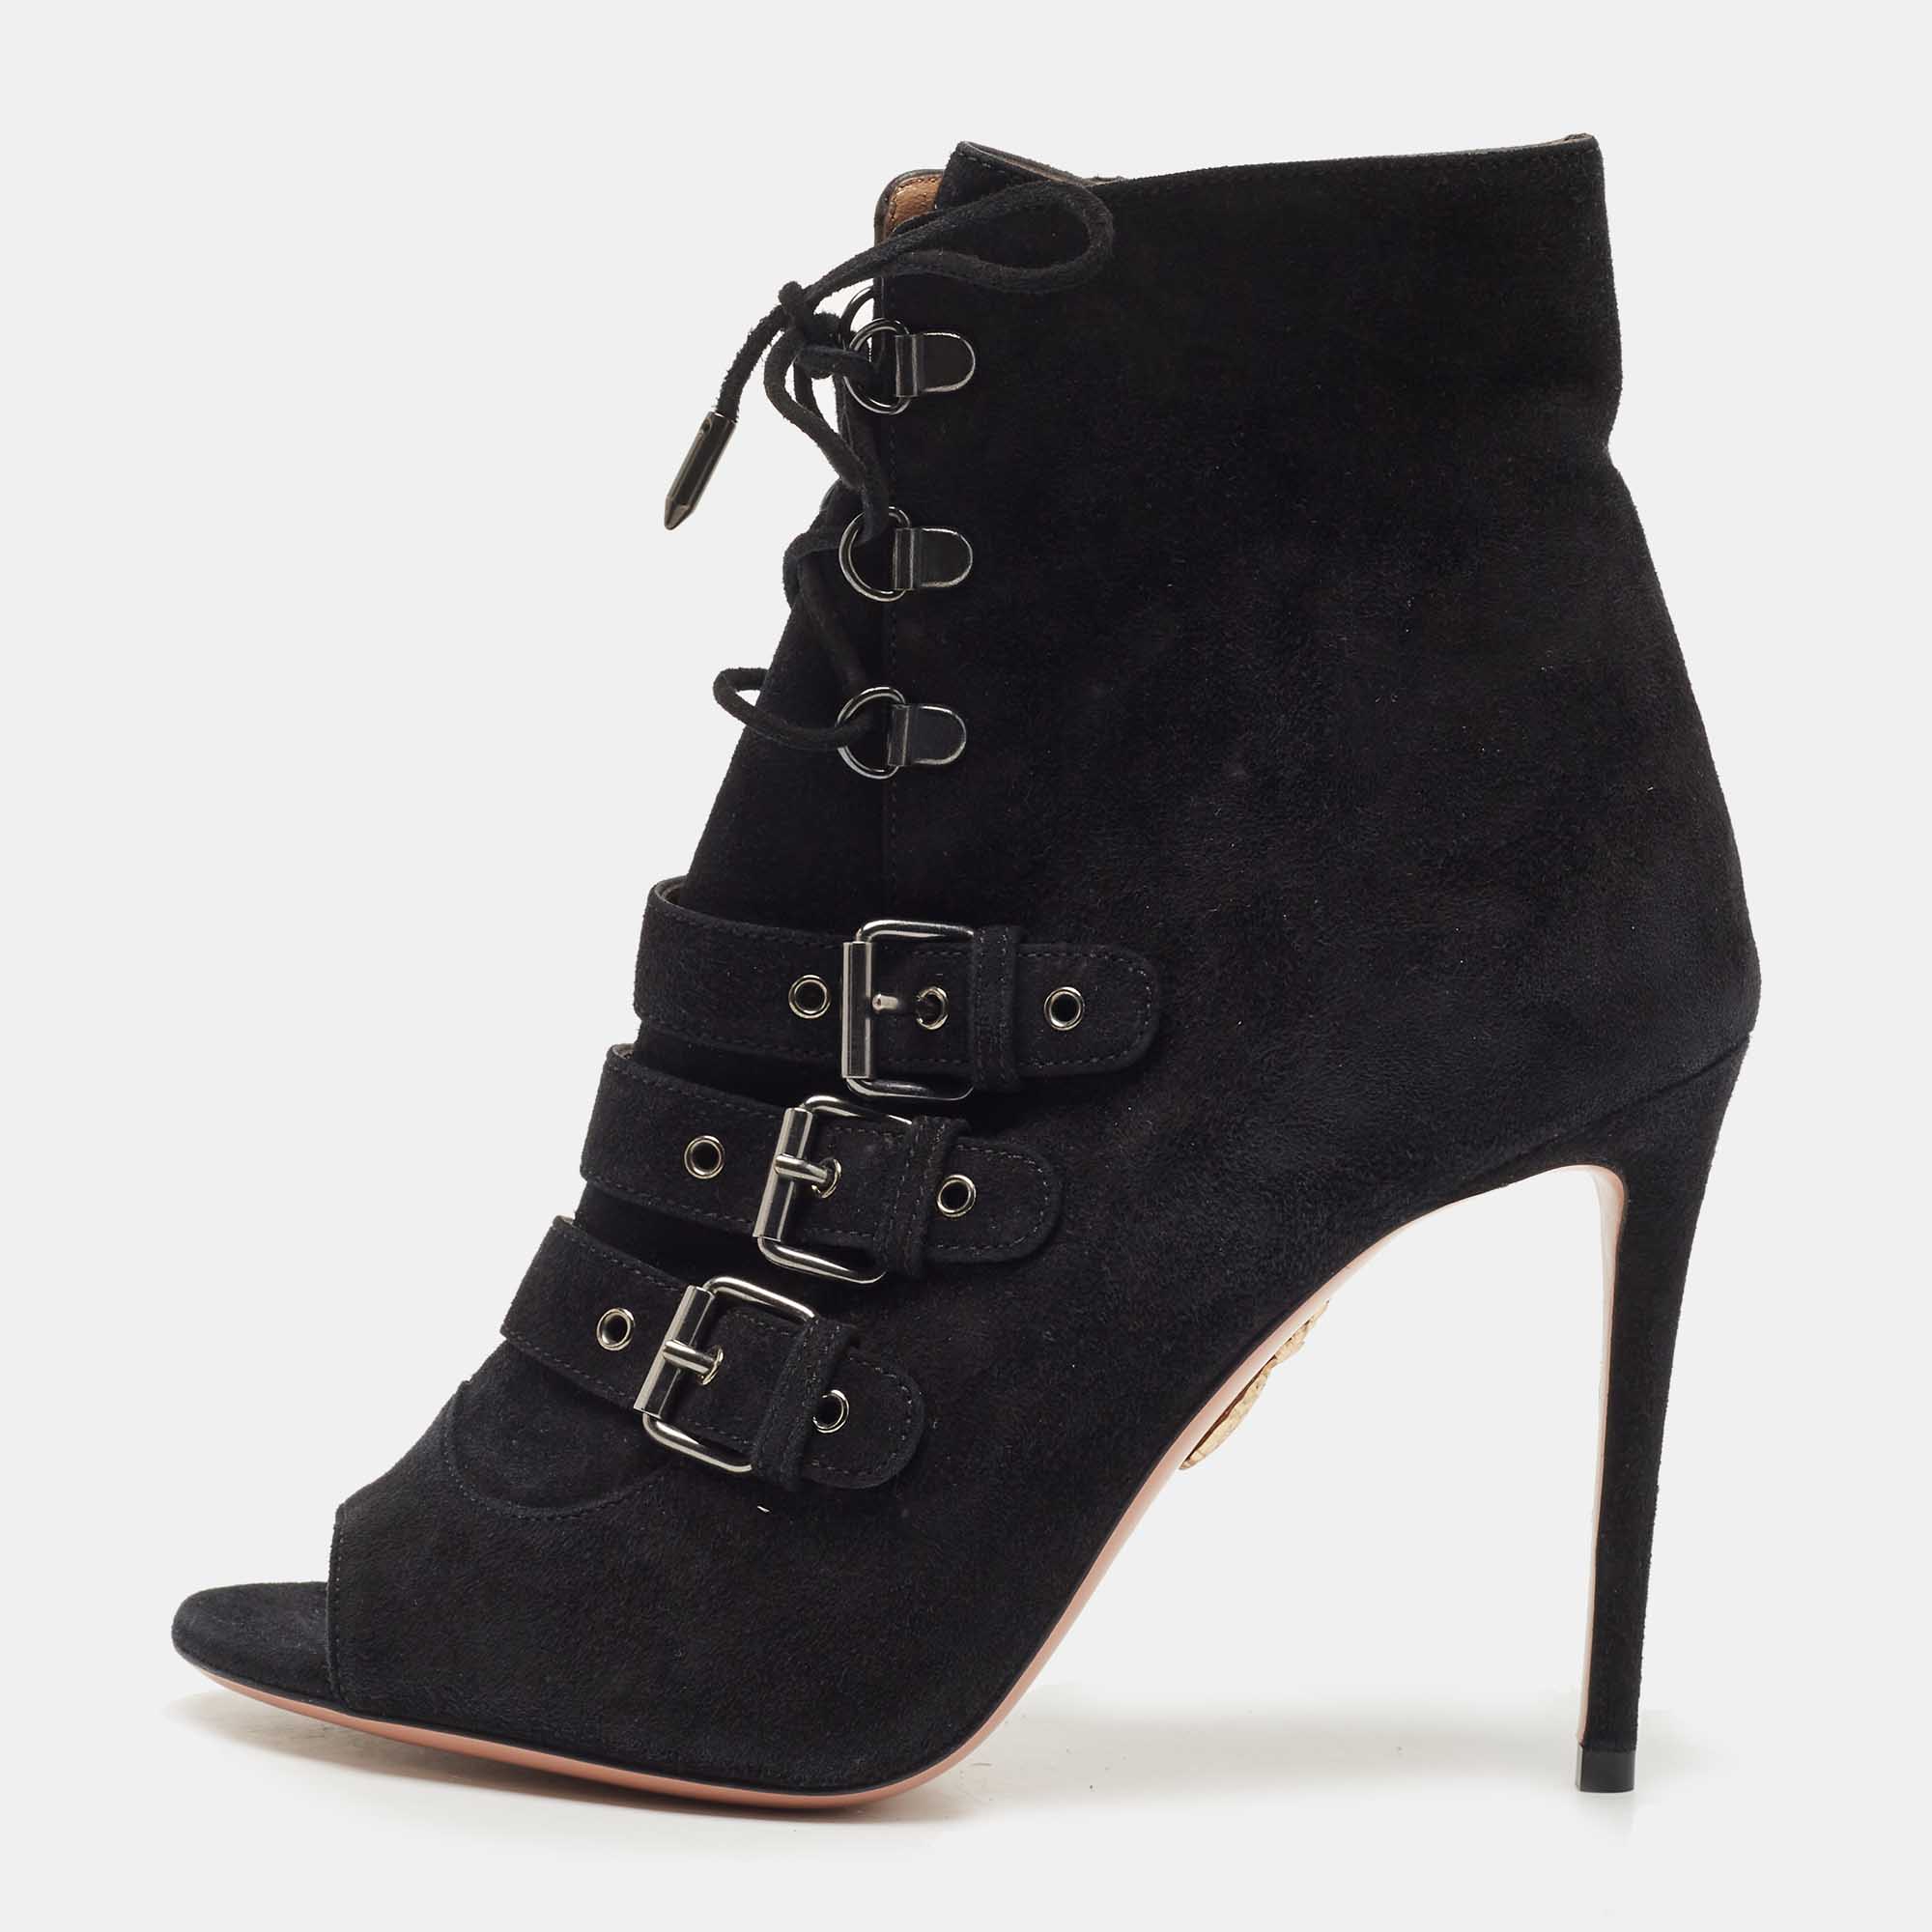 Aquazzura Black Suede Buckle Detailed Lace Up Peep Toe Ankle Booties Size 38